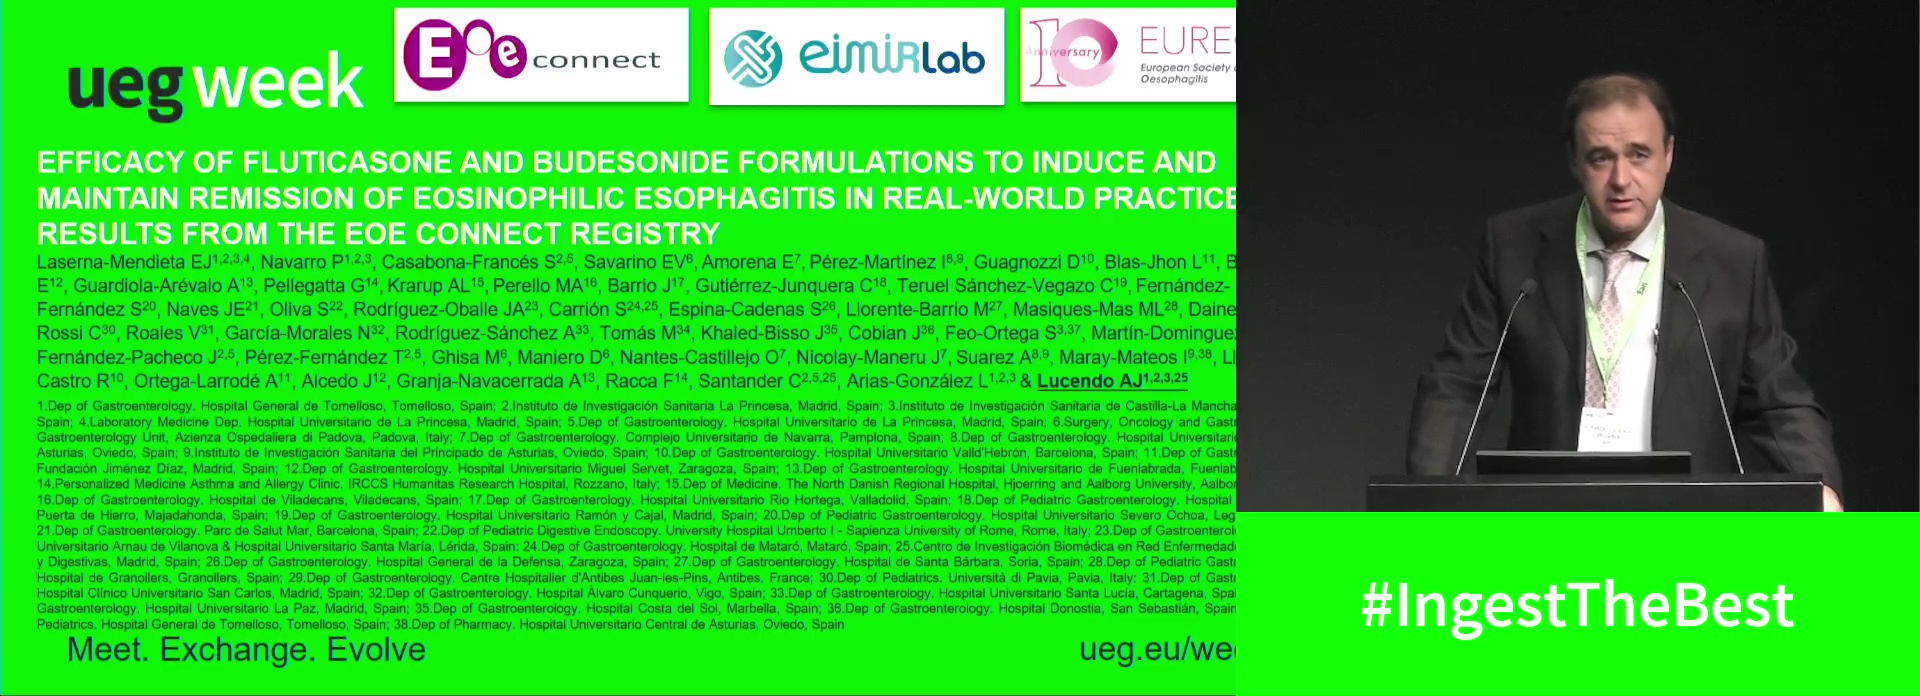 EFFICACY OF FLUTICASONE AND BUDESONIDE FORMULATIONS TO INDUCE AND MAINTAIN REMISSION OF EOSINOPHILIC ESOPHAGITIS IN REAL-WORLD PRACTICE: RESULTS FROM THE EOE CONNECT REGISTRY